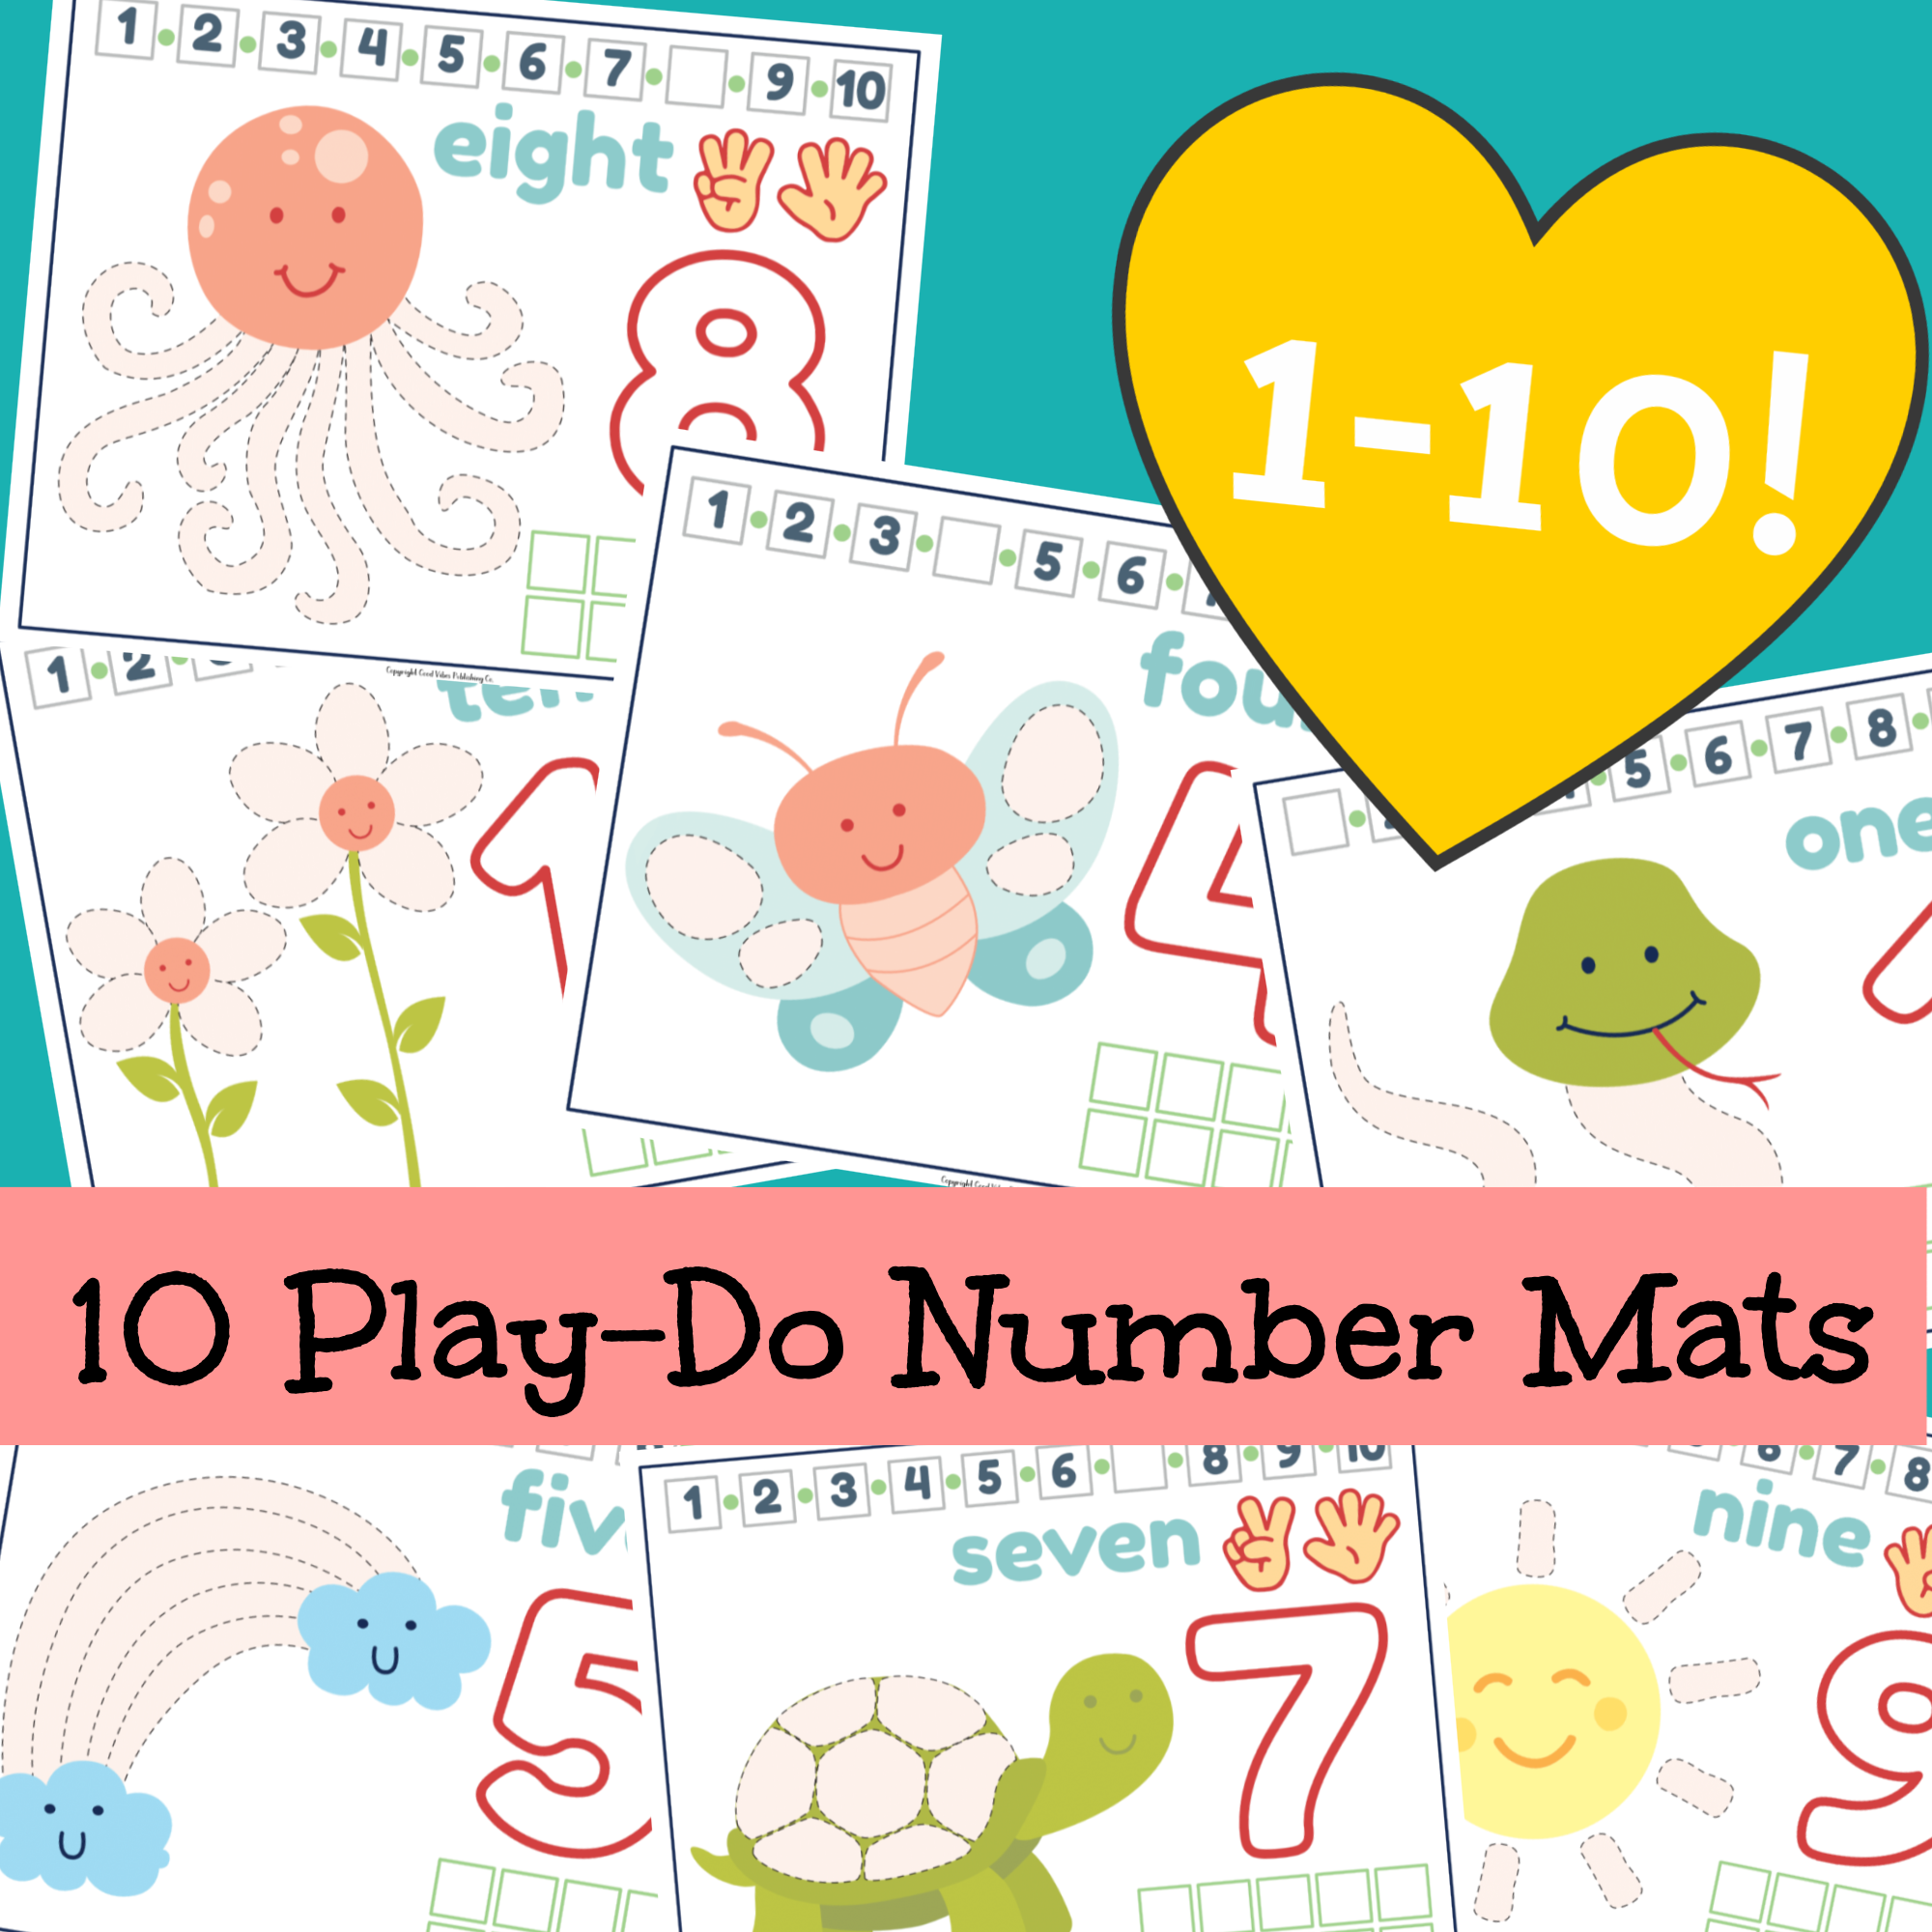 March Play-Doh Mats {1-20 and Make 10}